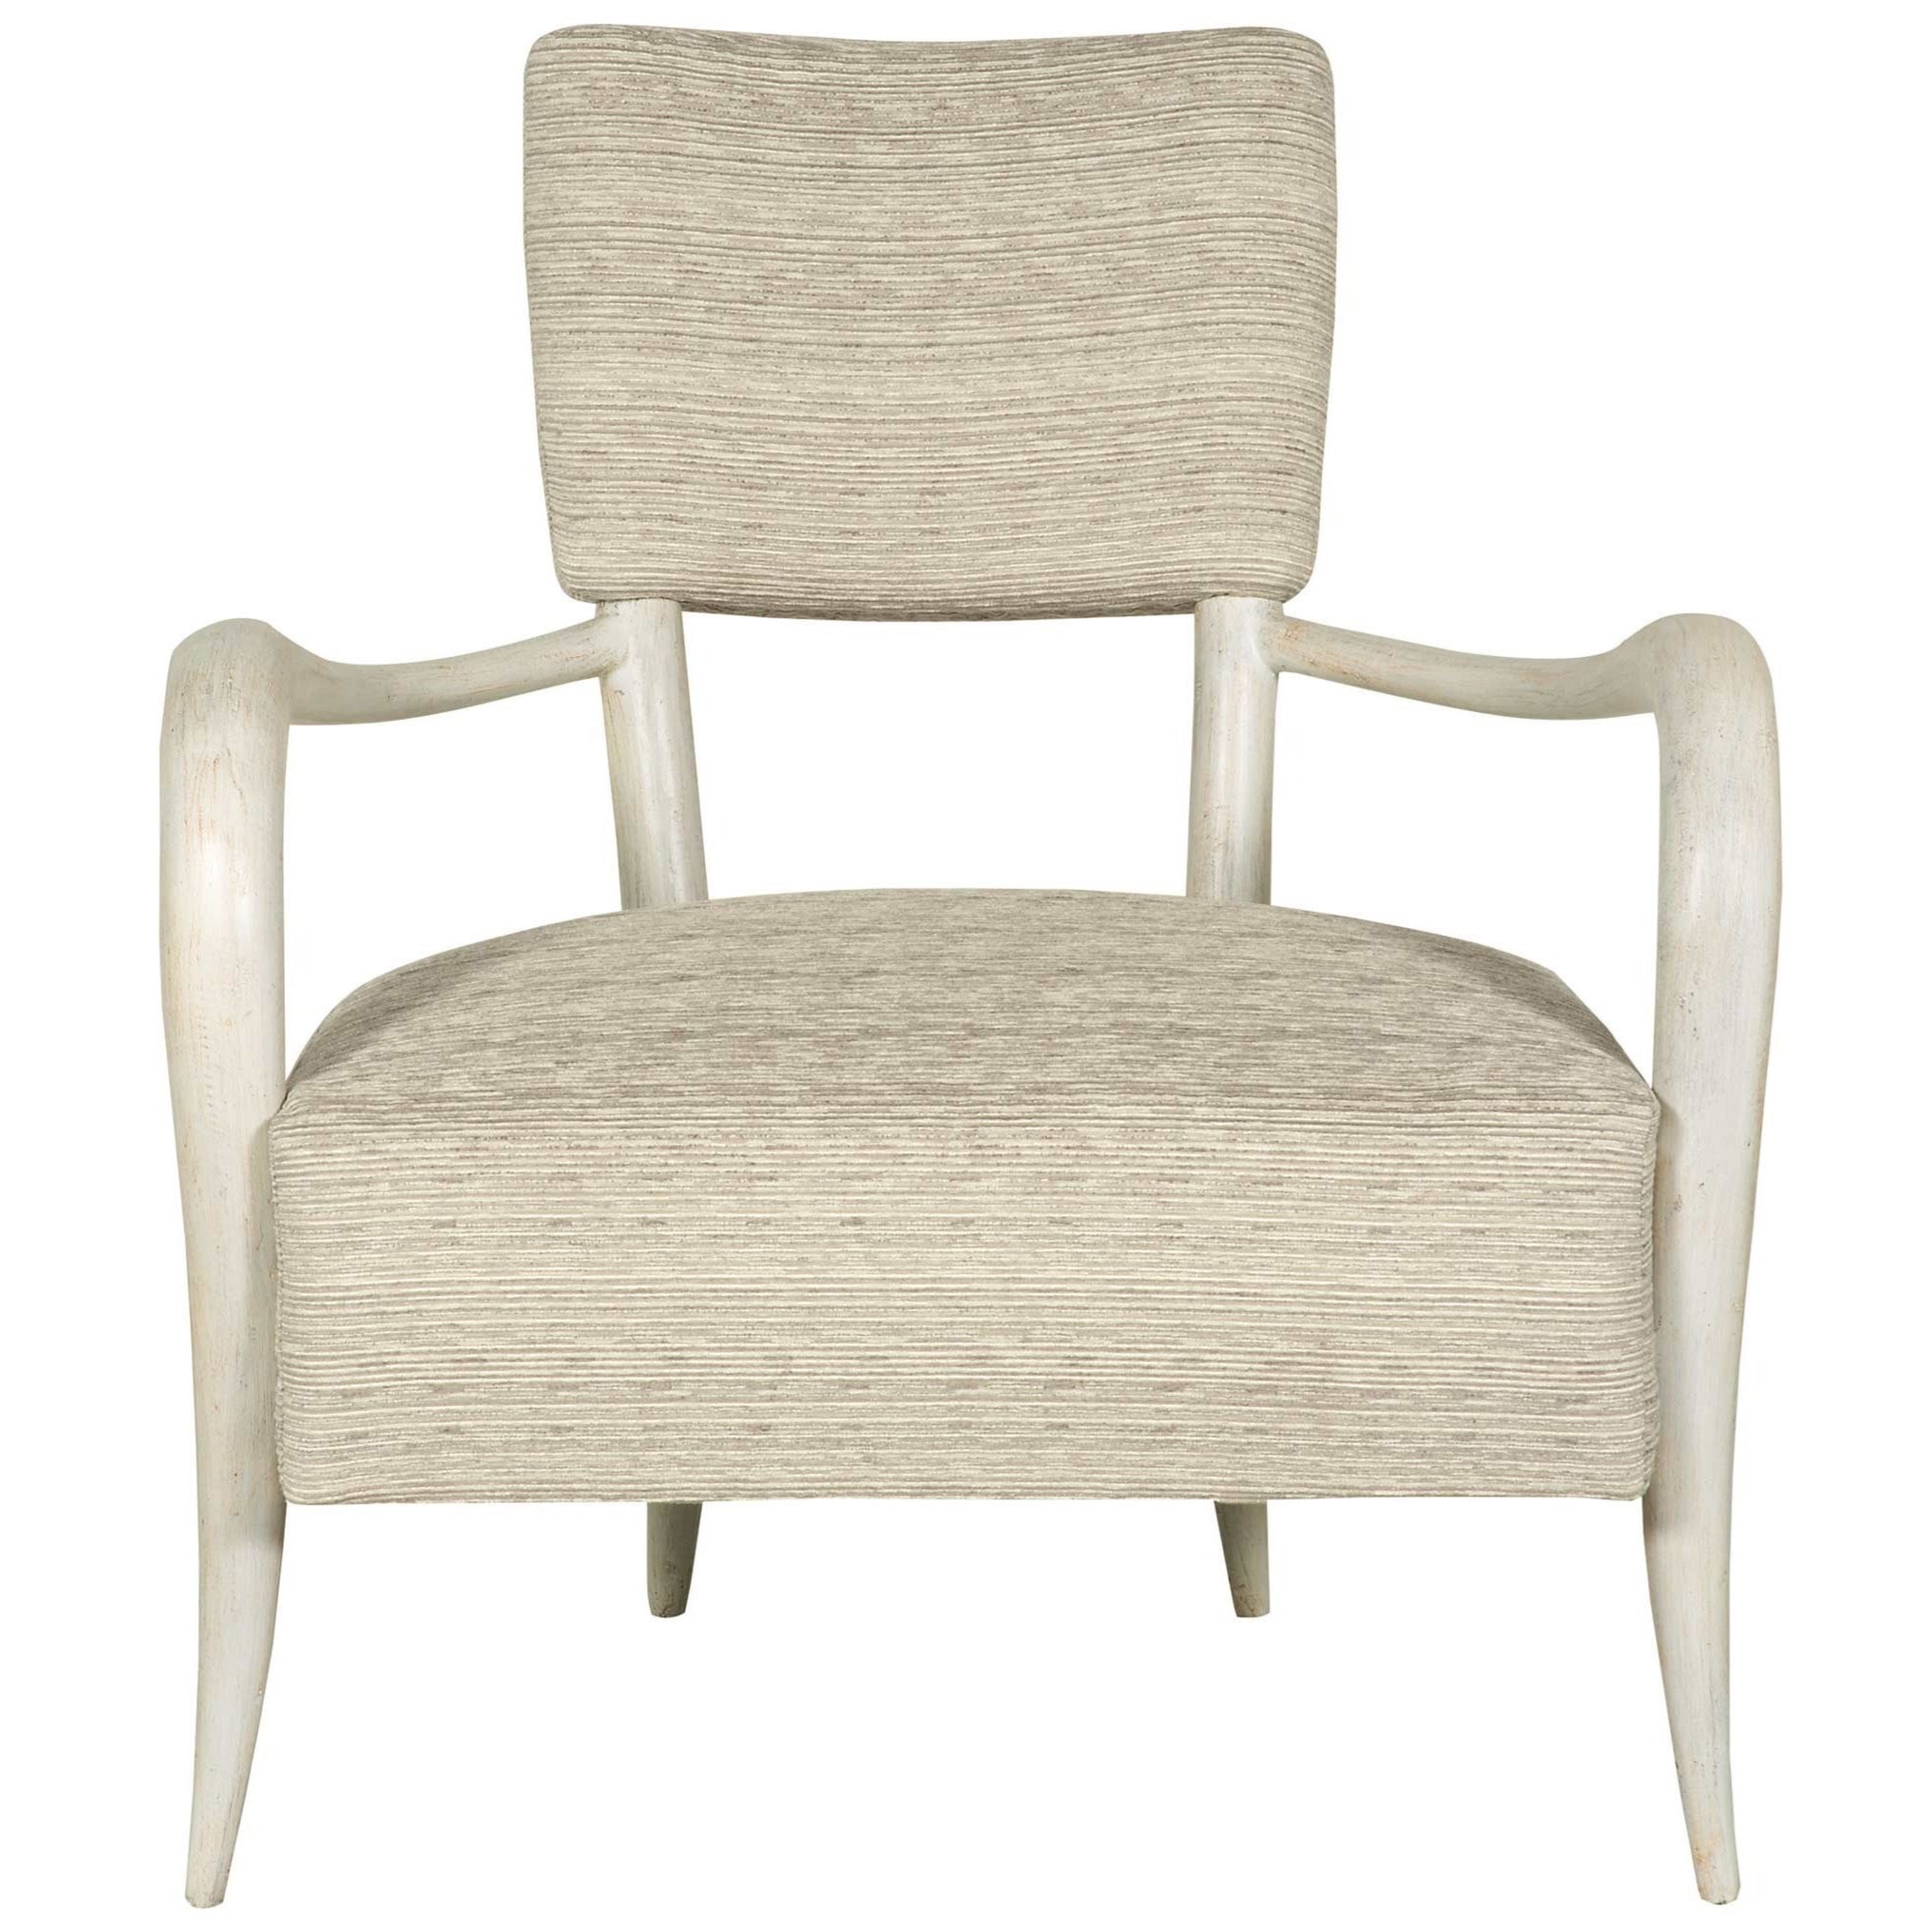 Bernhardt Kinston Wing Chair  Living room chairs, Furniture